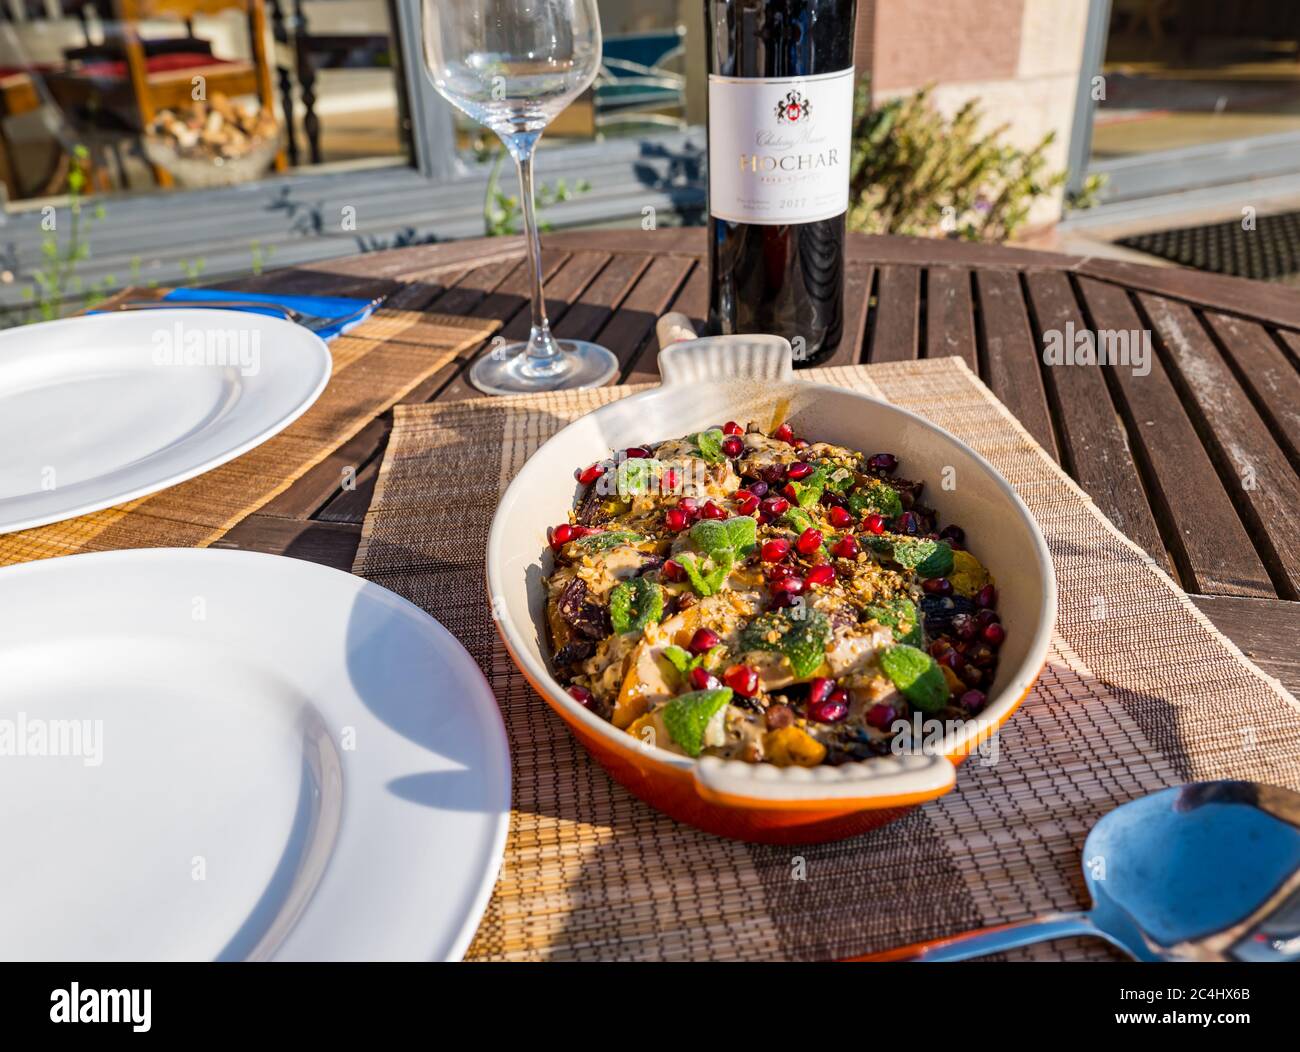 Middle Eastern roasted vegetable dish with butternut squash, pomegranate seeds; Lebanese red wine Chateau Musar Hochar from Bekaa Valley, UK Stock Photo